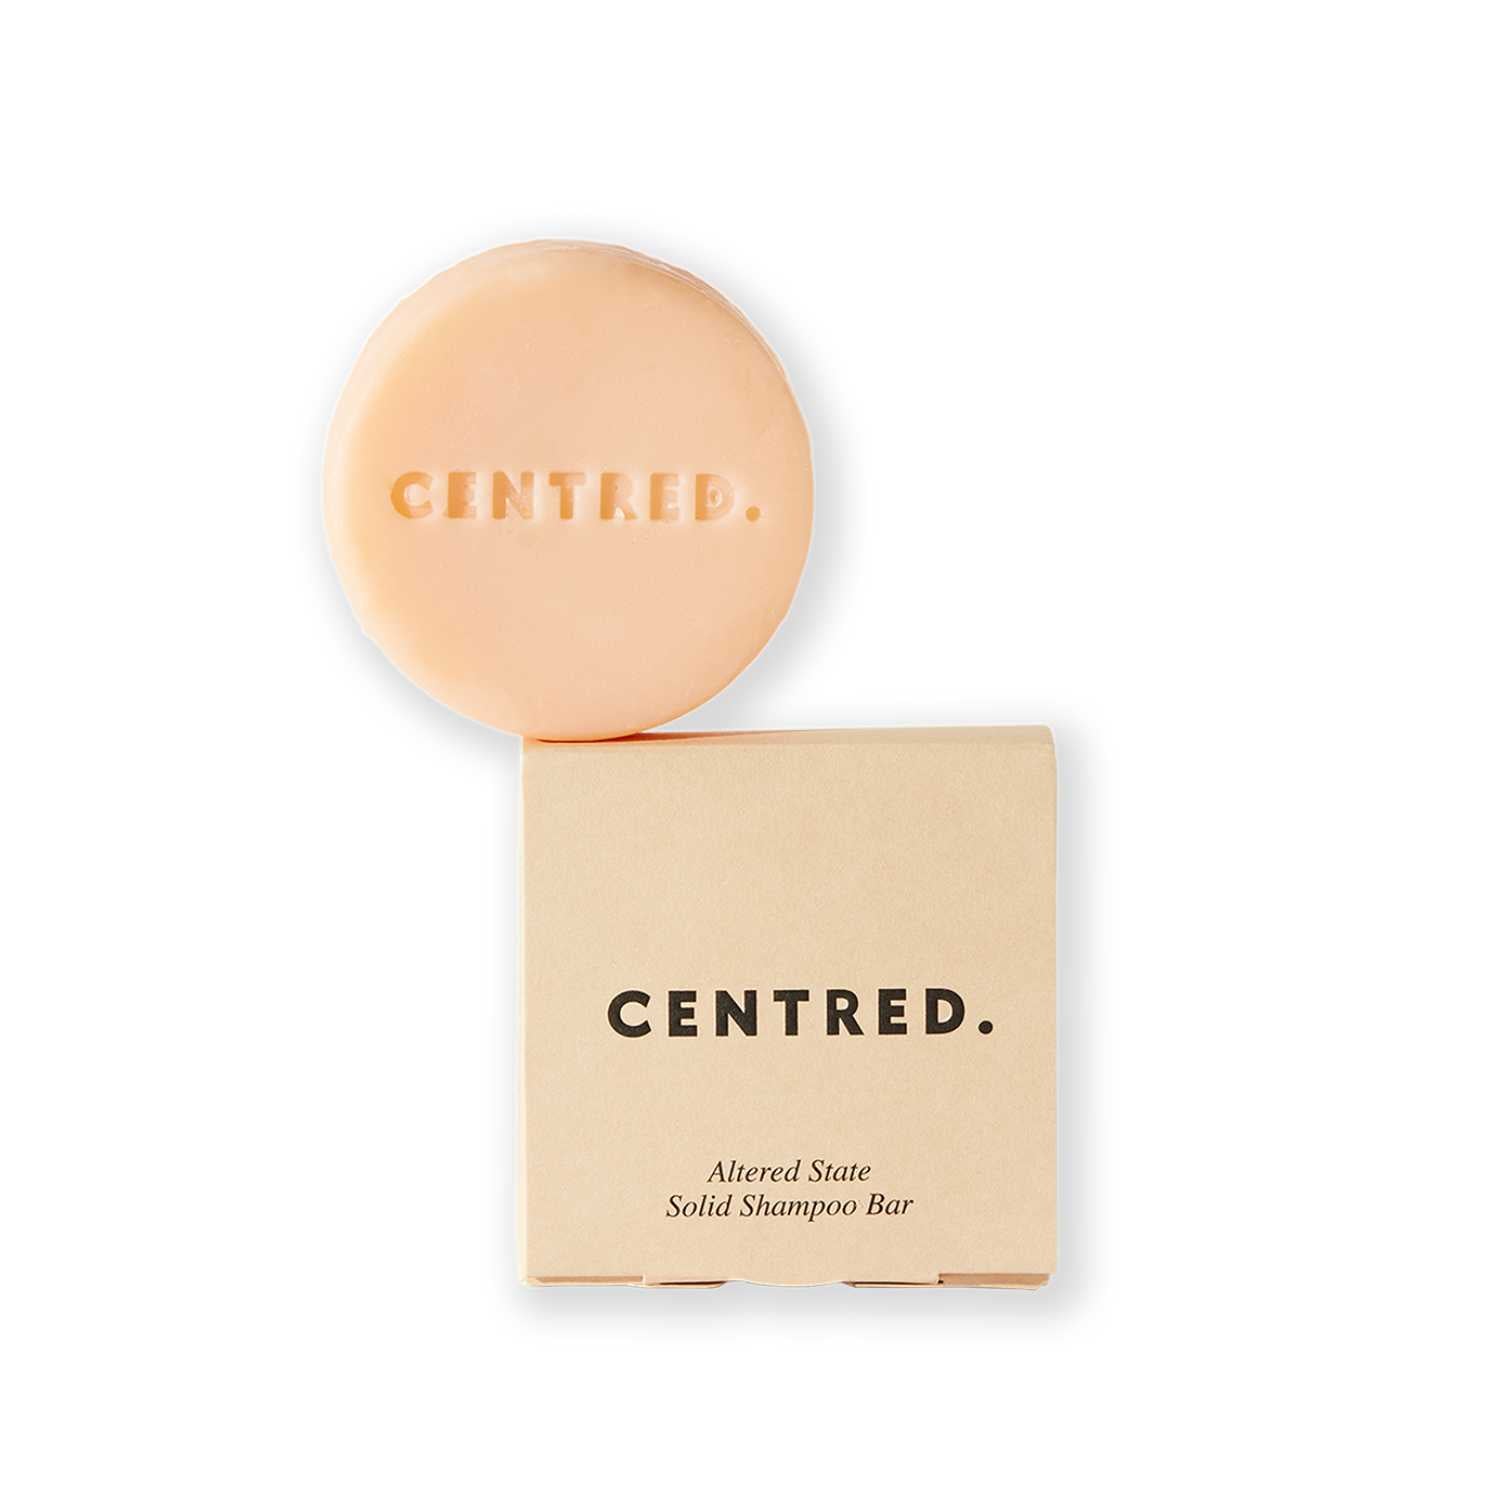 Altered State Solid Shampoo Bar - CENTRED.®